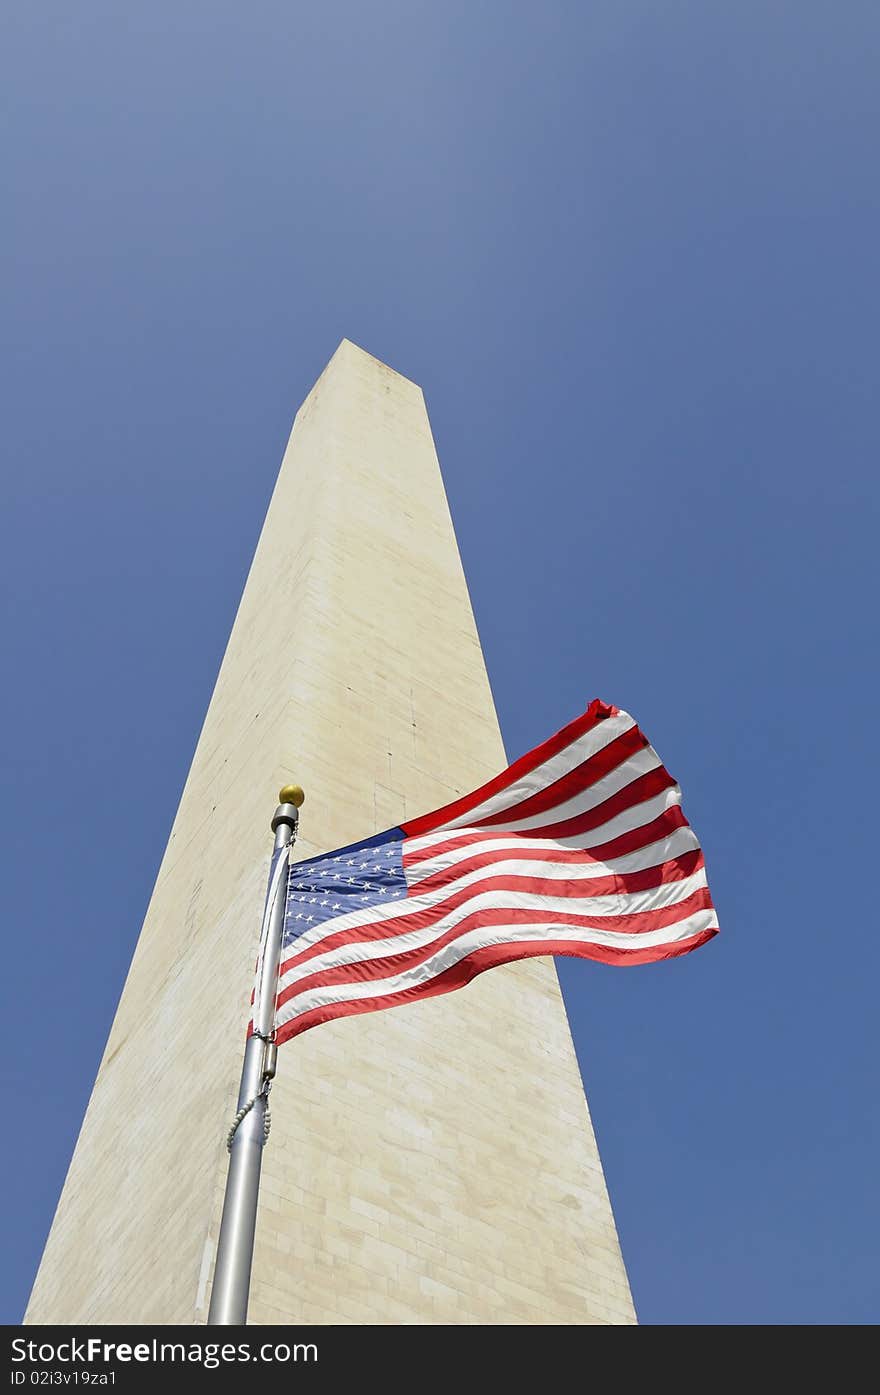 Washington monument in Washington DC against blue sky with american flag in front. Washington monument in Washington DC against blue sky with american flag in front